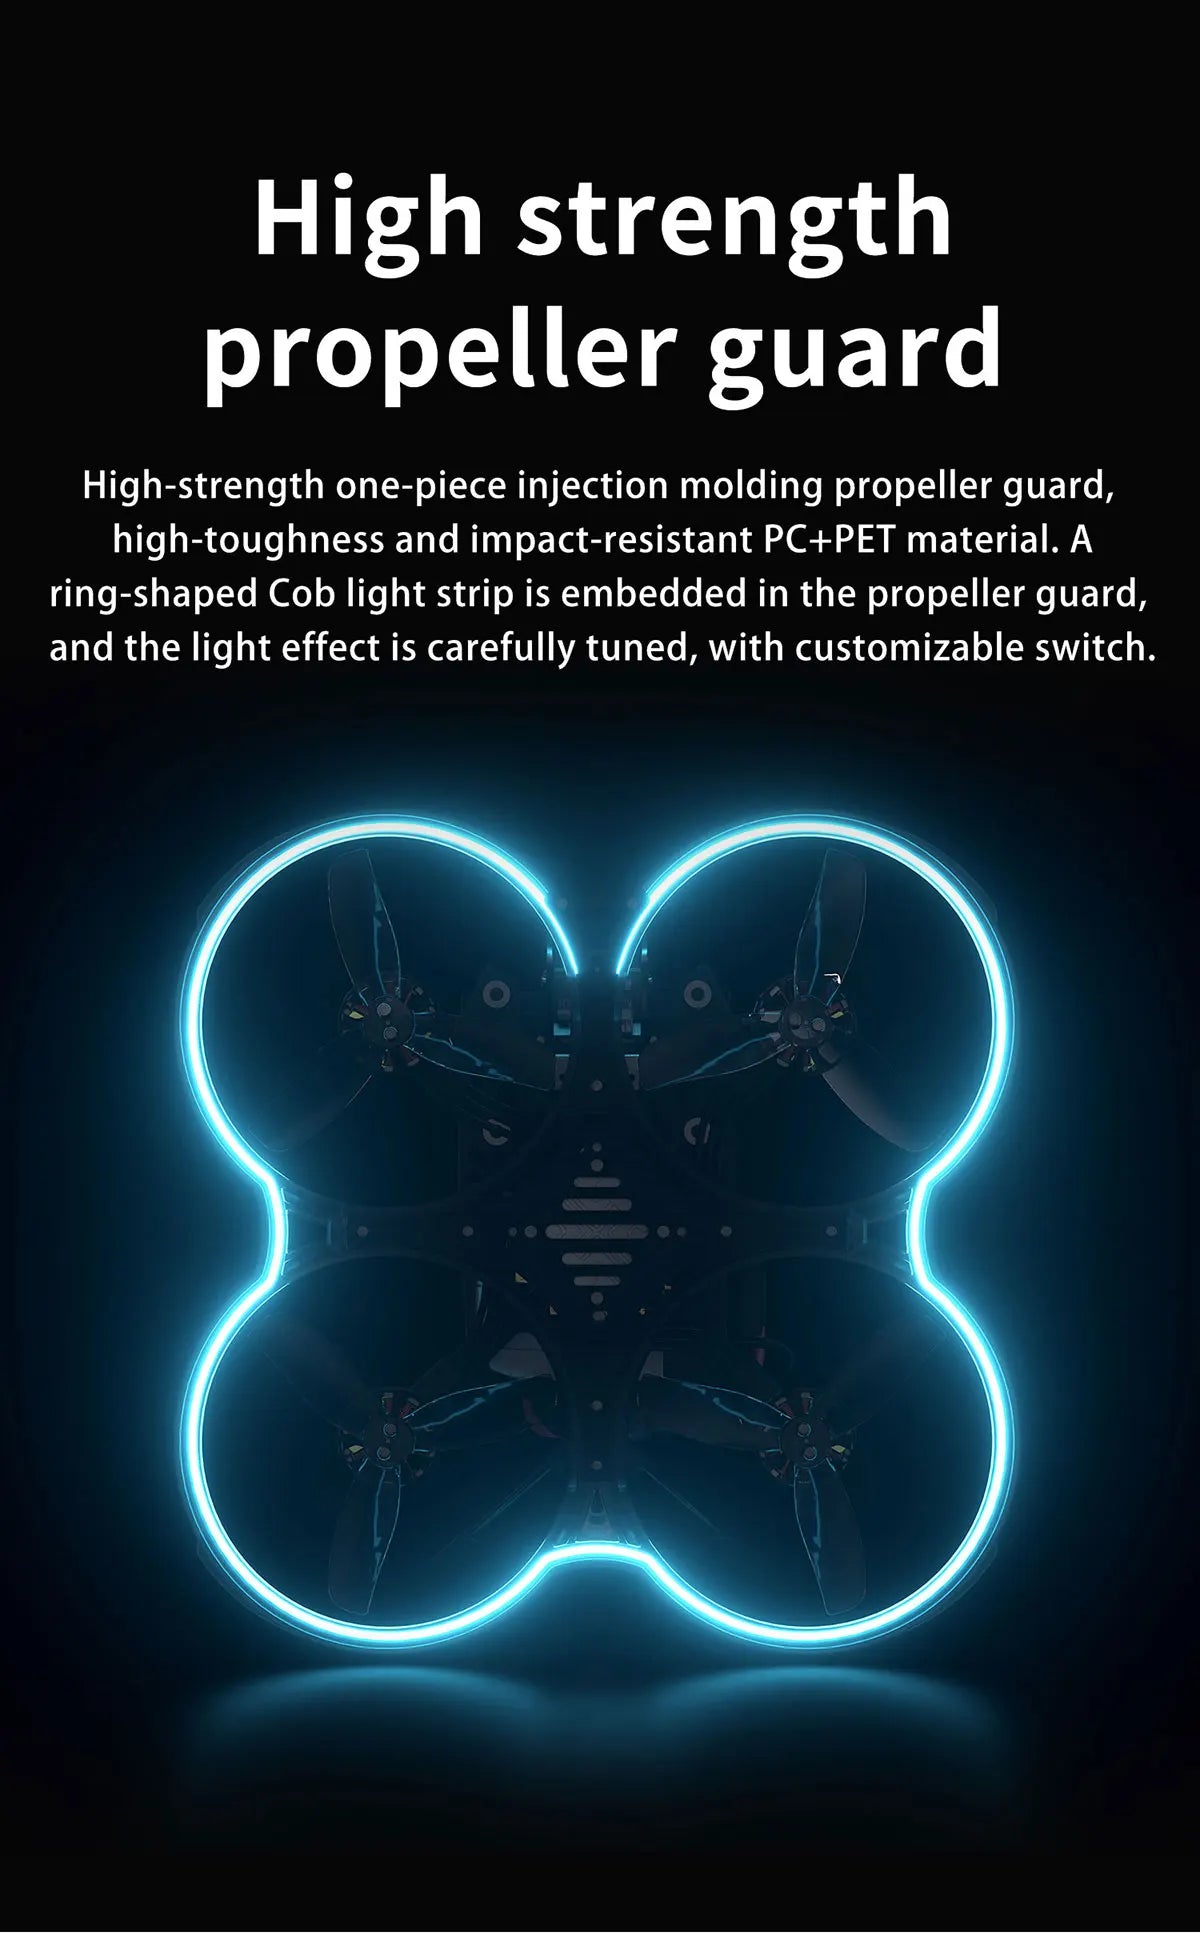 GEPRC Cinebot30 FPV Drone, a ring-shaped light strip is embedded in the propeller guard . a